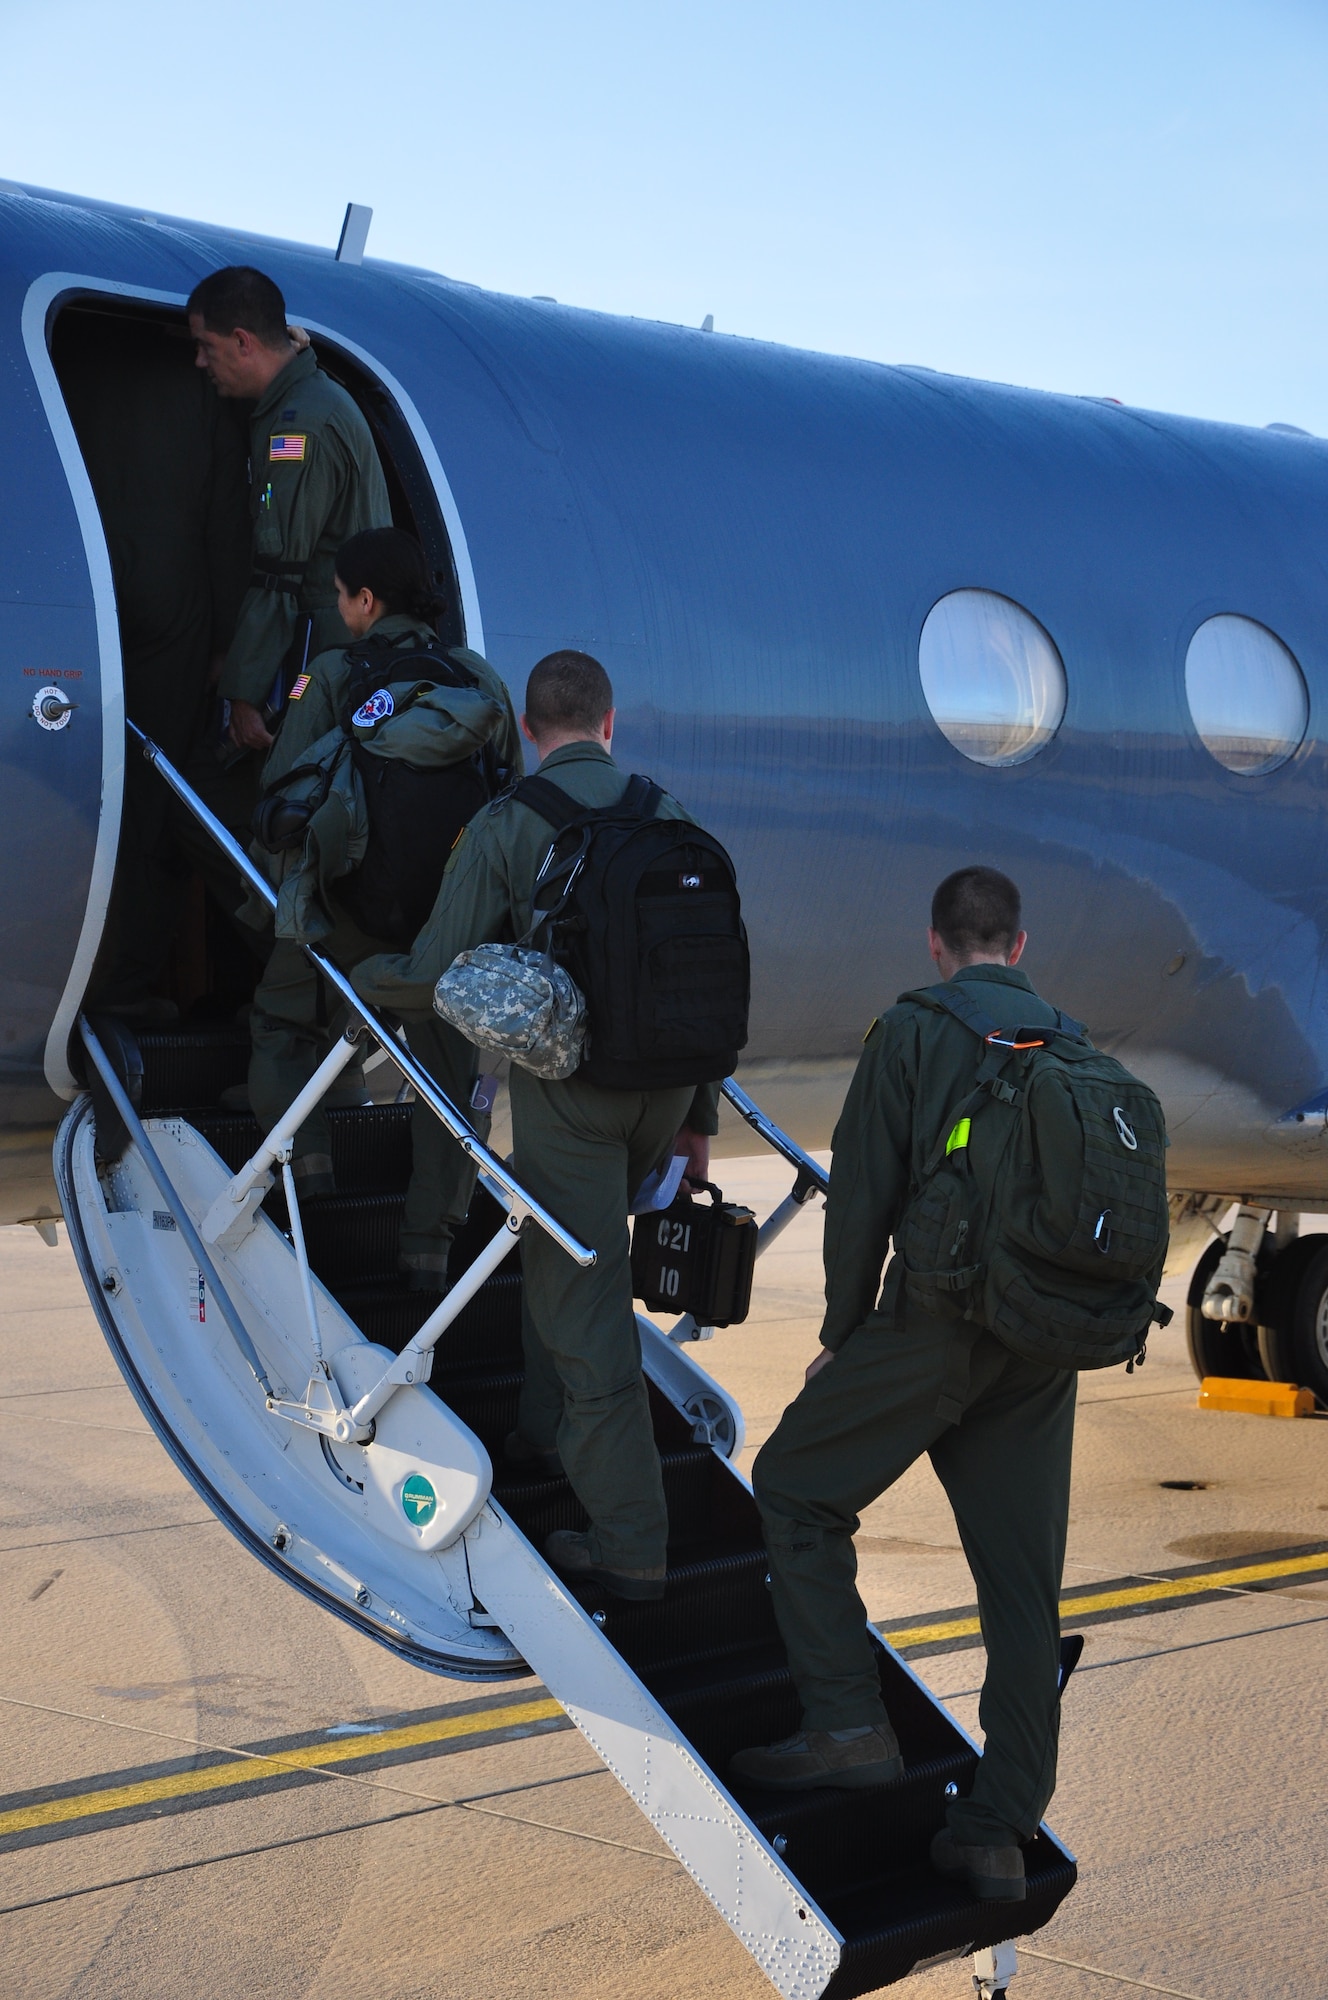 Members of the 86th Aeromedical Evacuation Squadron board a Gulfstream III, or G3, to begin a mission testing their capabilities on a new airframe at Ramstein Air Base, Germany, Sept. 3, 2012. The squadron is hoping to start using the G3 for short missions to Africa and Eurasia. (U.S. Air Force photo/Tech. Sgt. Chad Thompson)